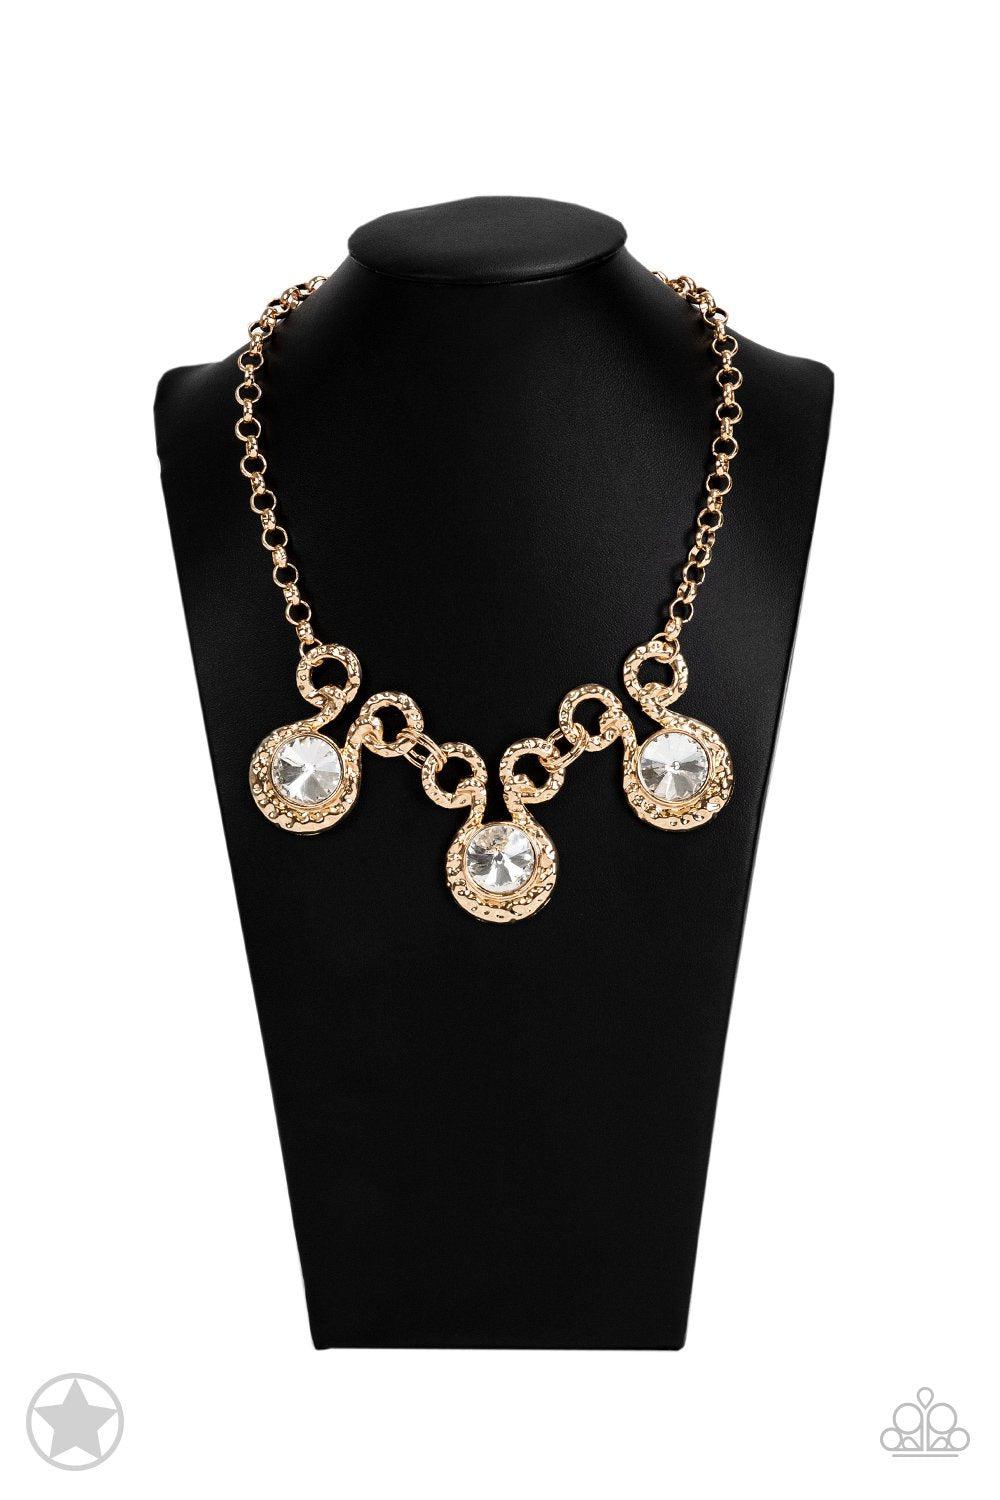 Hypnotized Gold and White Rhinestone Necklace and matching Earrings - Paparazzi Accessories- on bust -CarasShop.com - $5 Jewelry by Cara Jewels